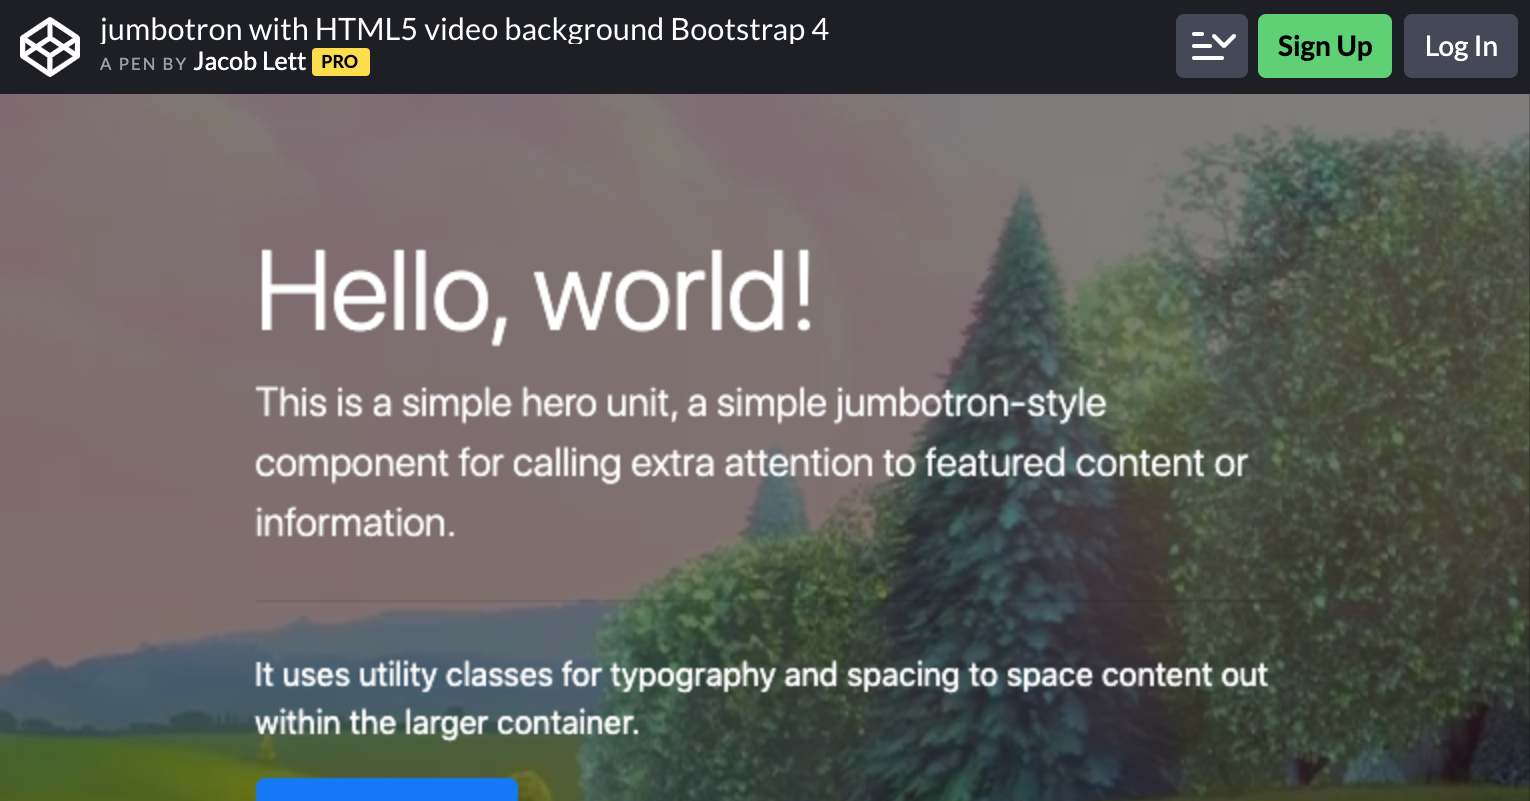 Jumbotron with HTML5 Video Background